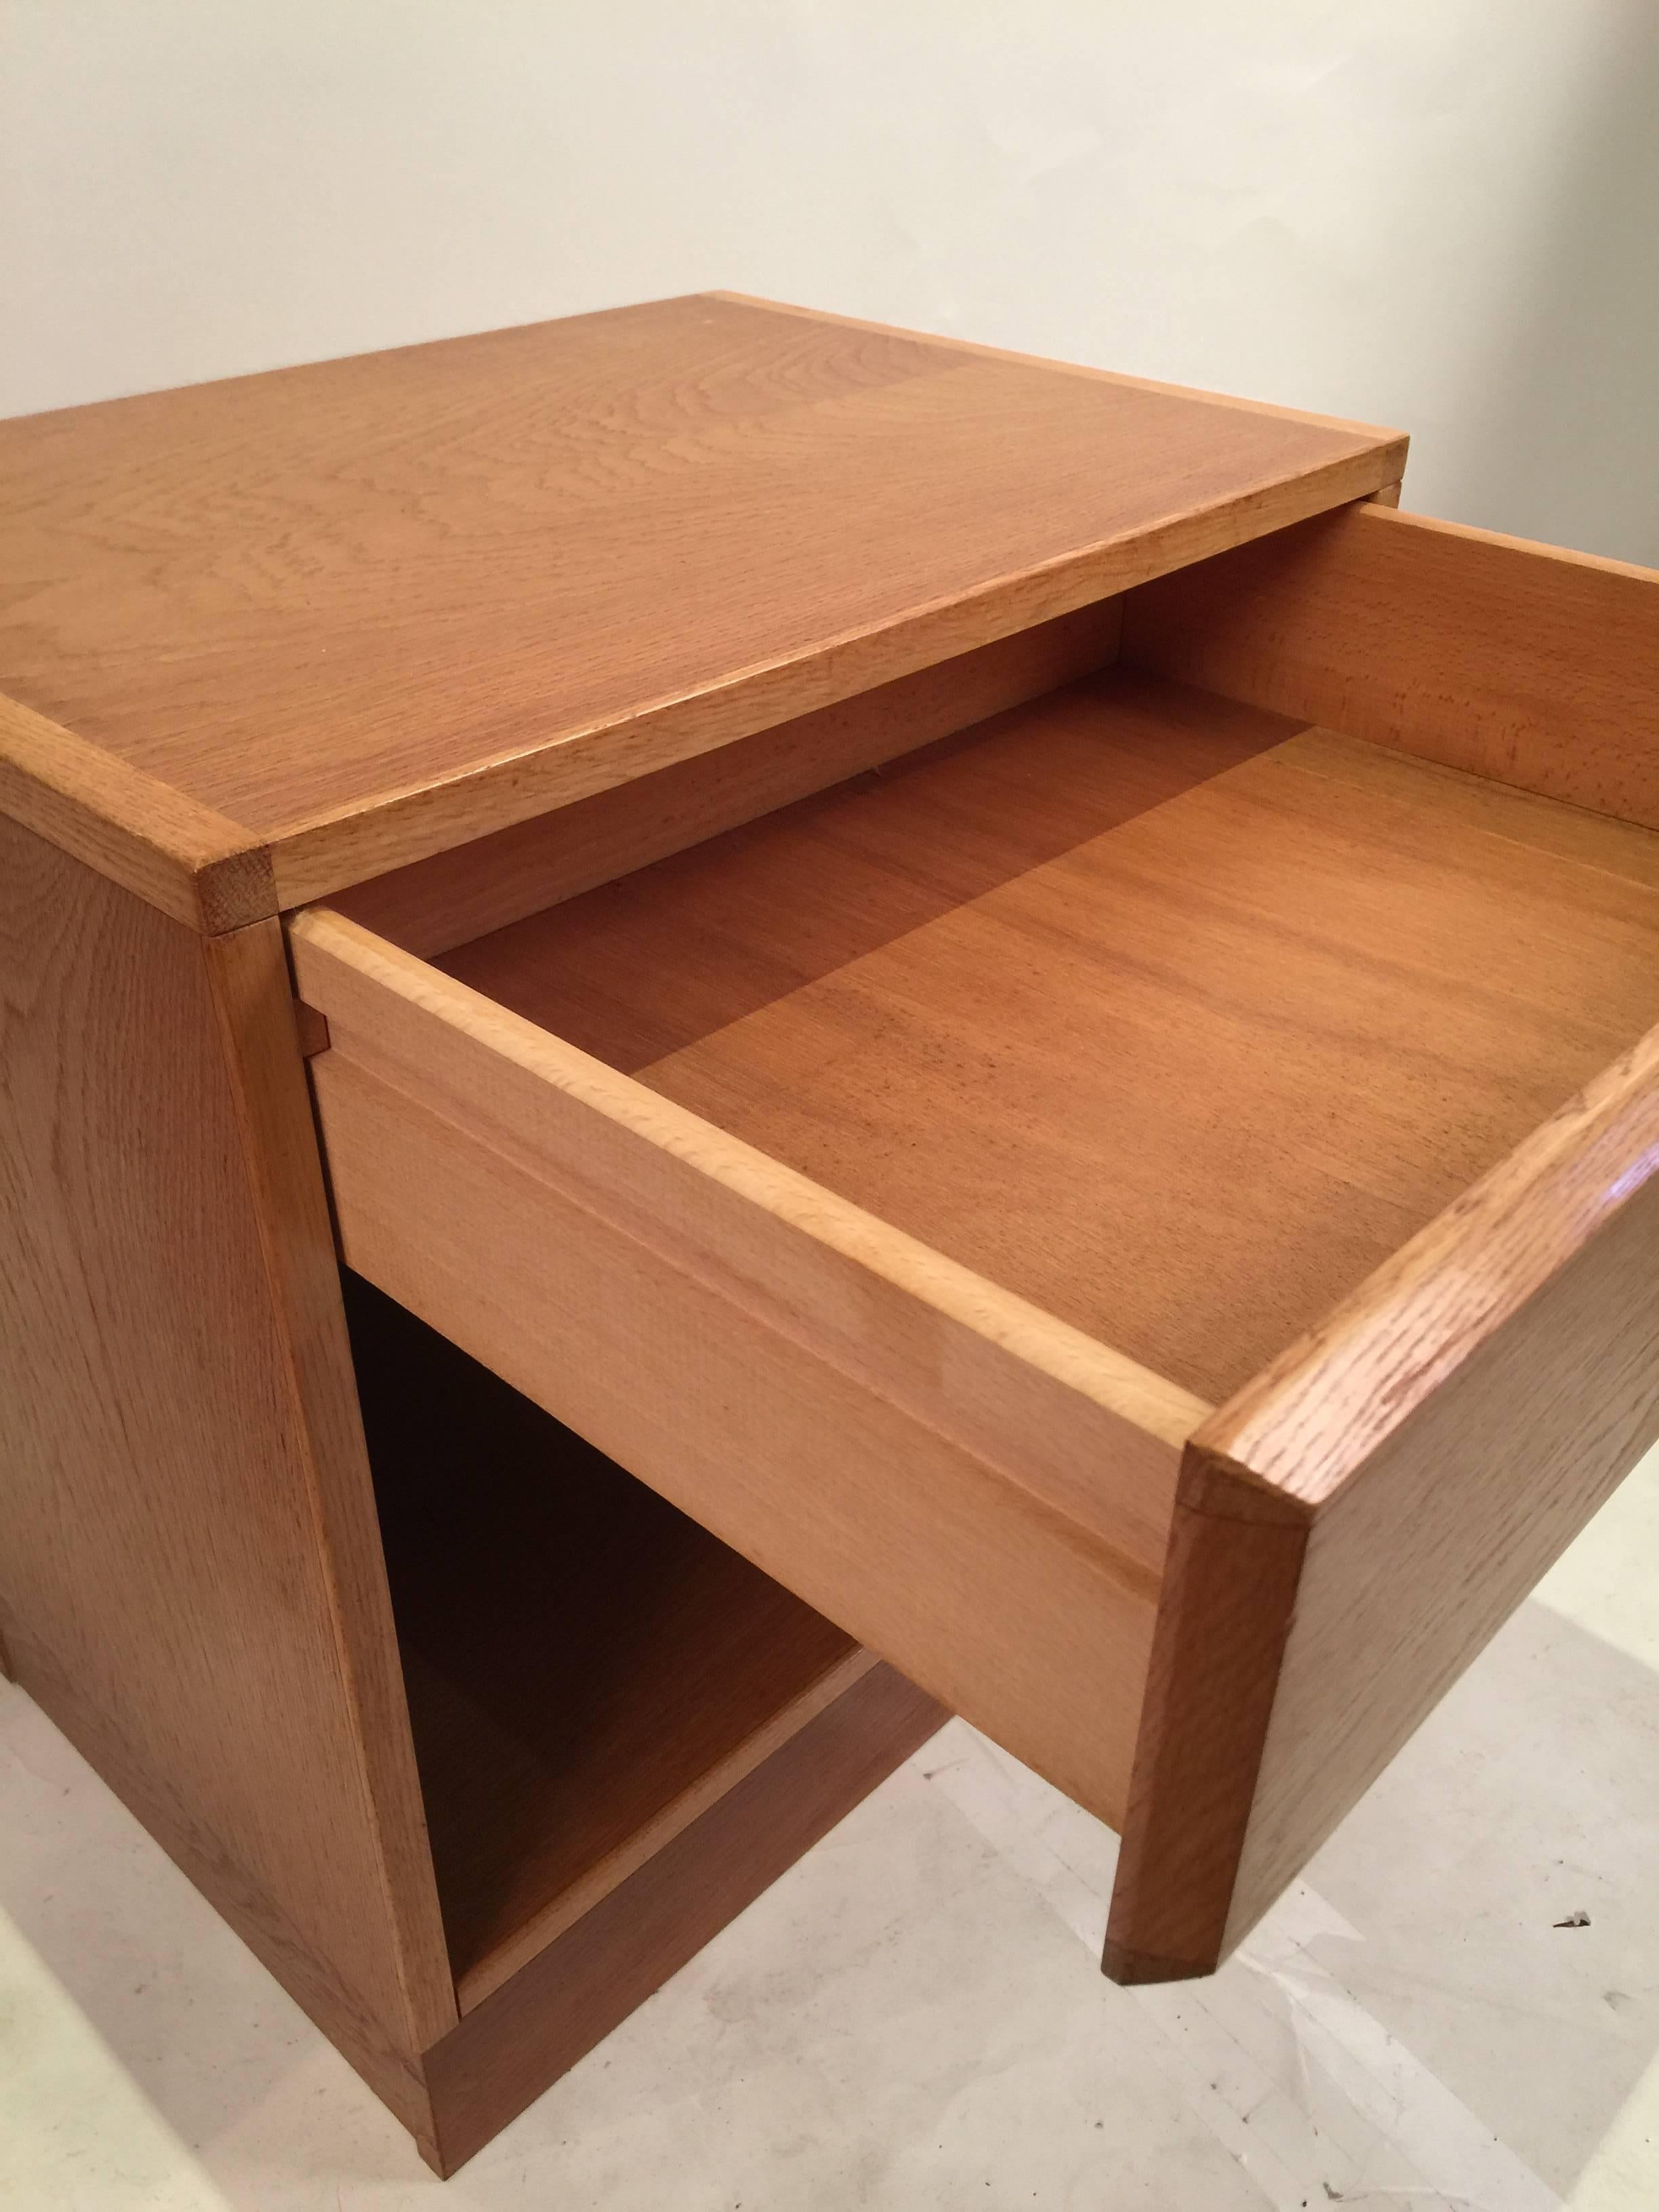 Simple pair of teak nightstand with drawers and open storage underneath. Clear coat finish and bevelled fronts. Danish maker's mark tag on the back of the nightstands. Good vintage condition, showing minimal wear, except one heat stain on top of one